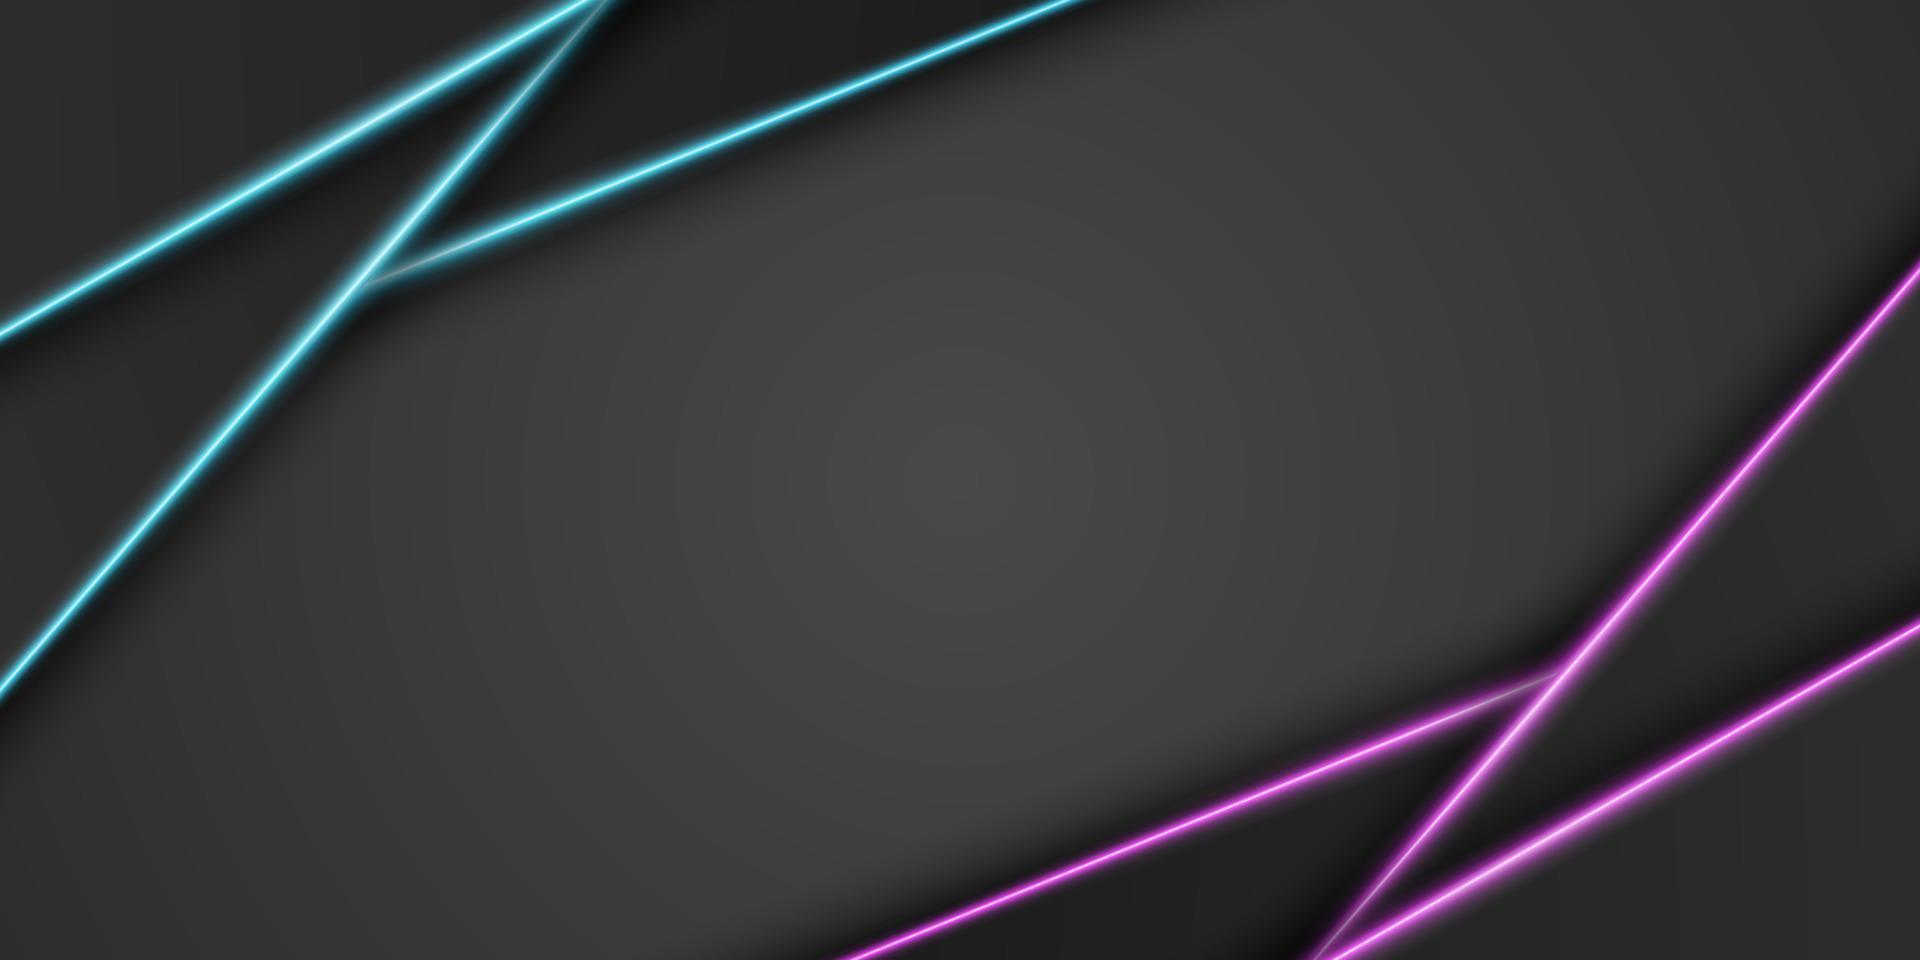 Abstract metallic black frame background, triangular overlap layer with bright neon blue and purple light line, diagonal shape, dark minimal design with copy space, vector illustration